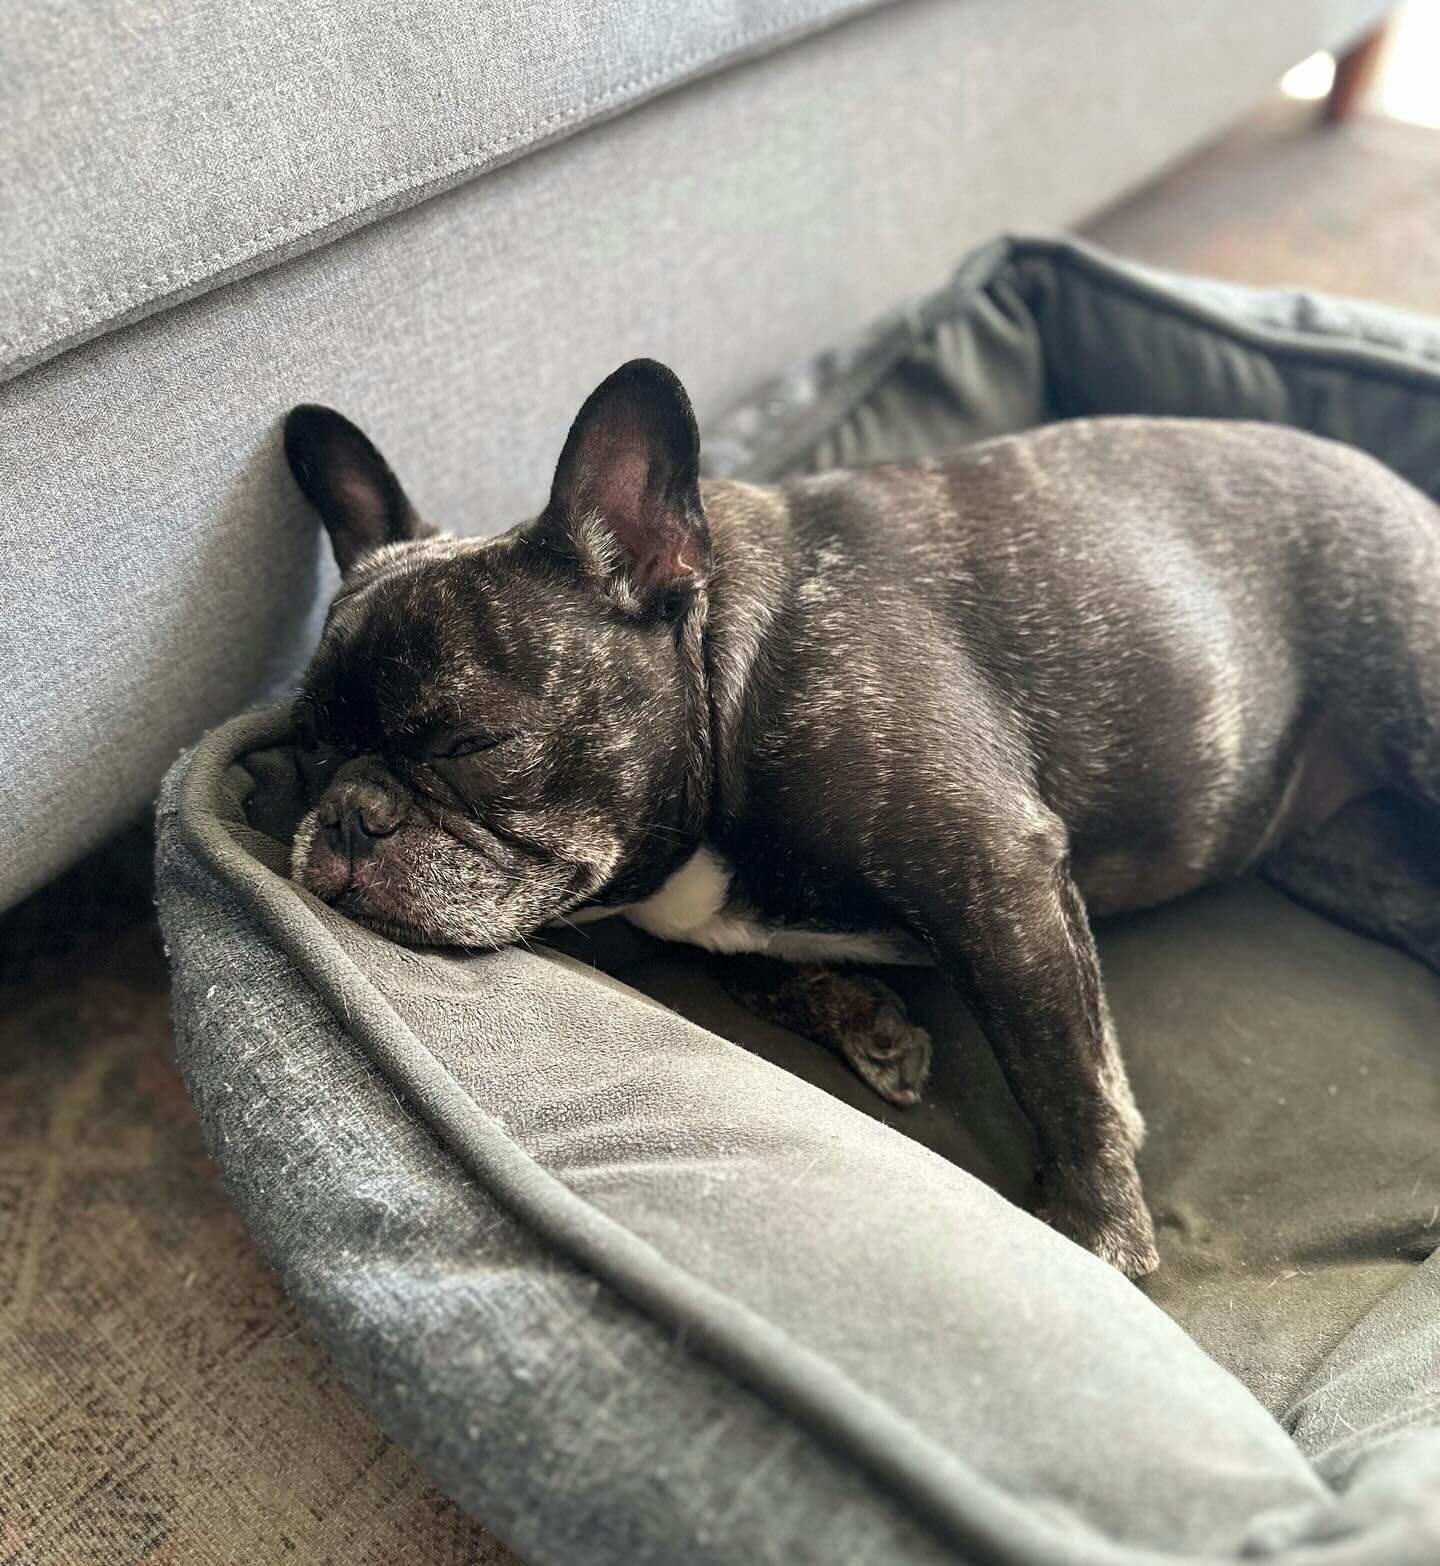 6 years old but forever our puppykins. Happy National Puppy Day @lefrenchiepixie #frenchie #frenchiesideeye #sideeye #pixiethefrenchbulldog #nationalpuppyday